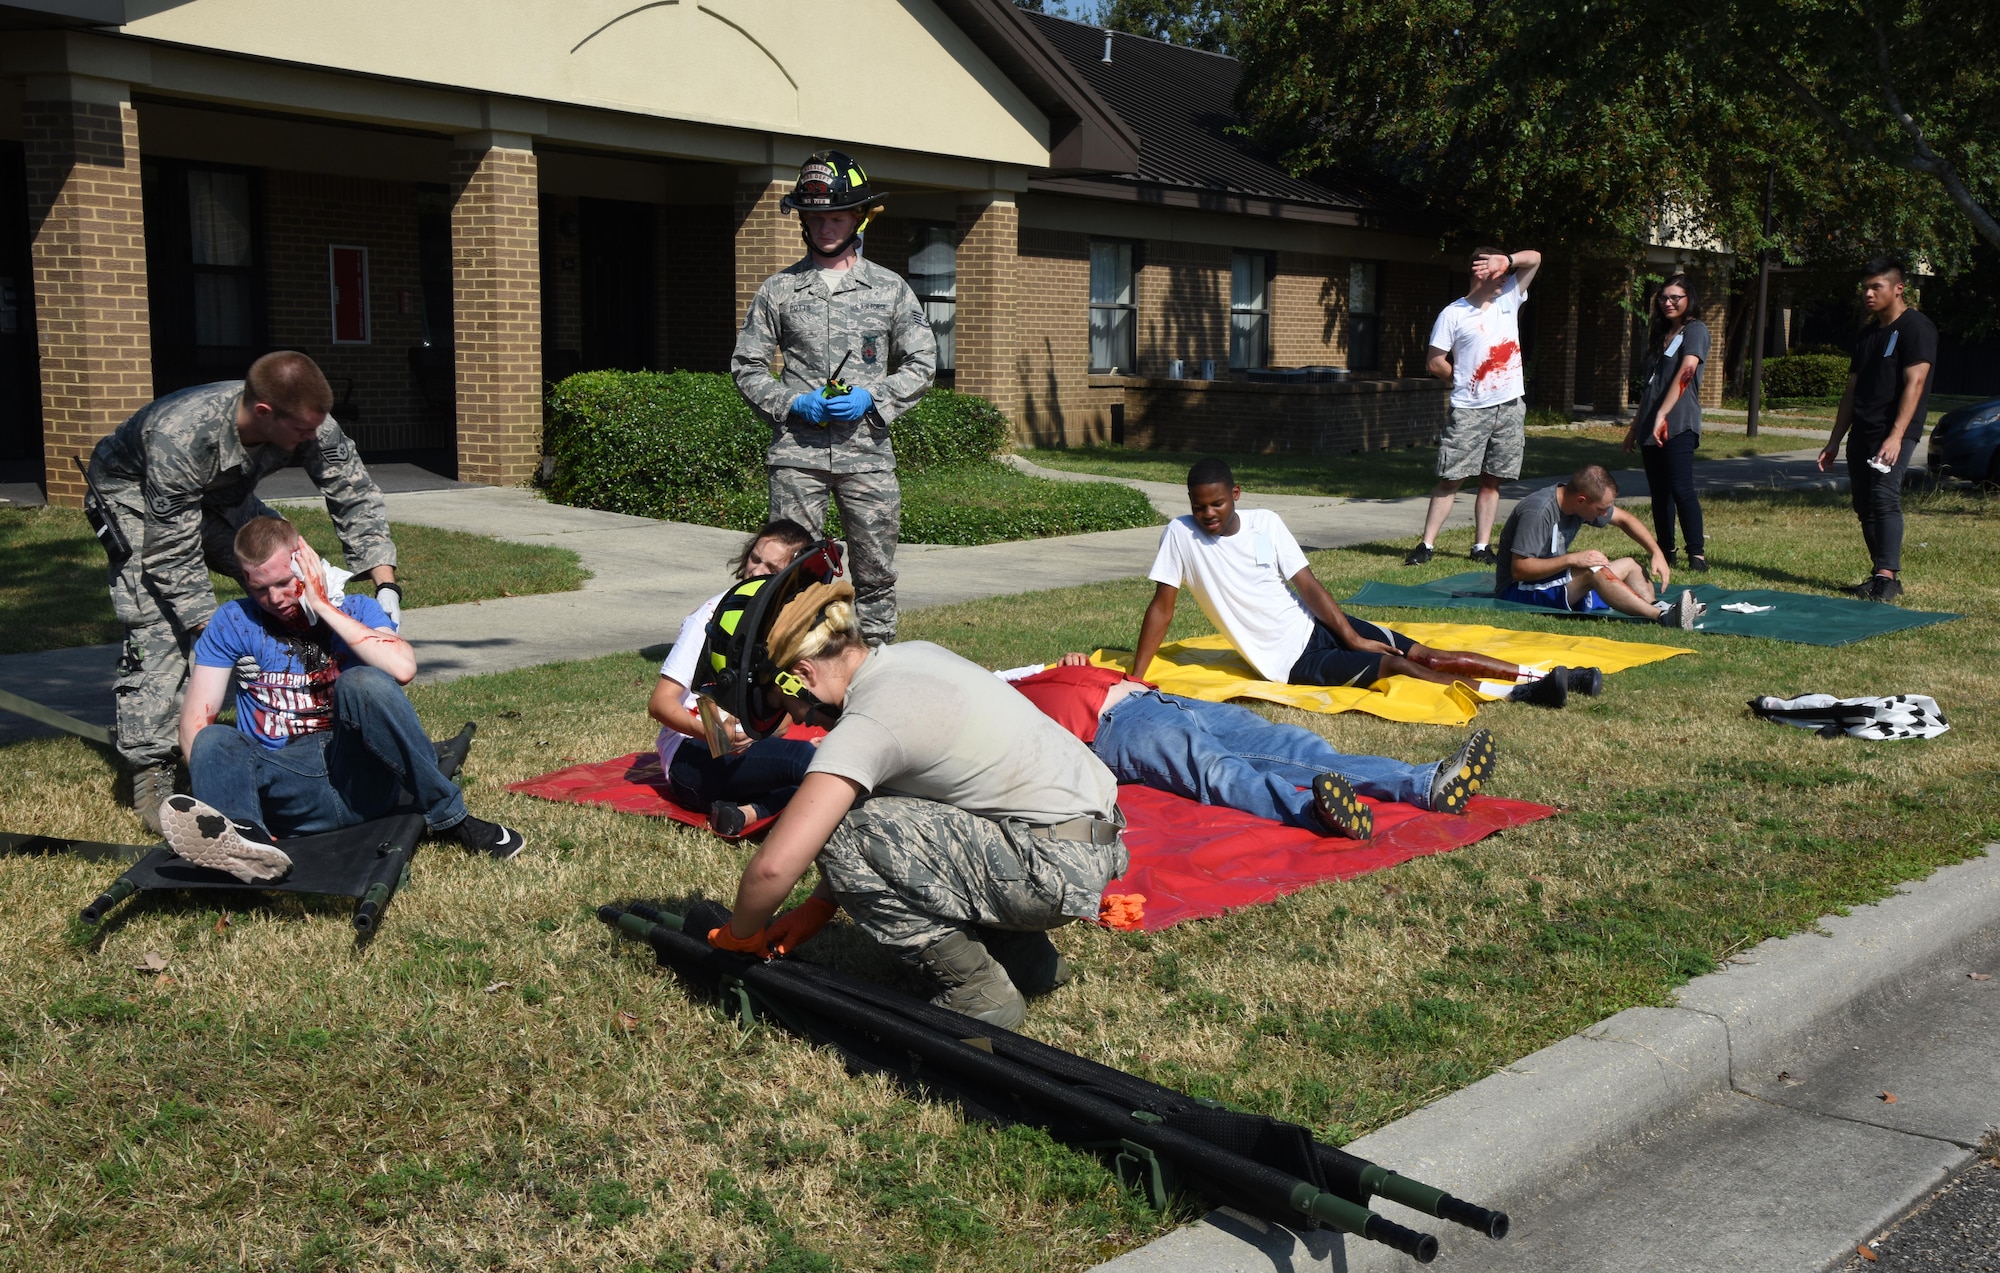 Keesler first responders medically assess actors portraying victims during an active shooter exercise outside of the Arnold Medical Annex Sept. 21, 2017, on Keesler Air Force Base, Mississippi. An active duty Air Force member simulated opening fire at the Arnold Medical Annex and the Larcher Chapel in order to test the base's ability to respond to and recover from a mass casualty event. (U.S. Air Force photo by Kemberly Groue)